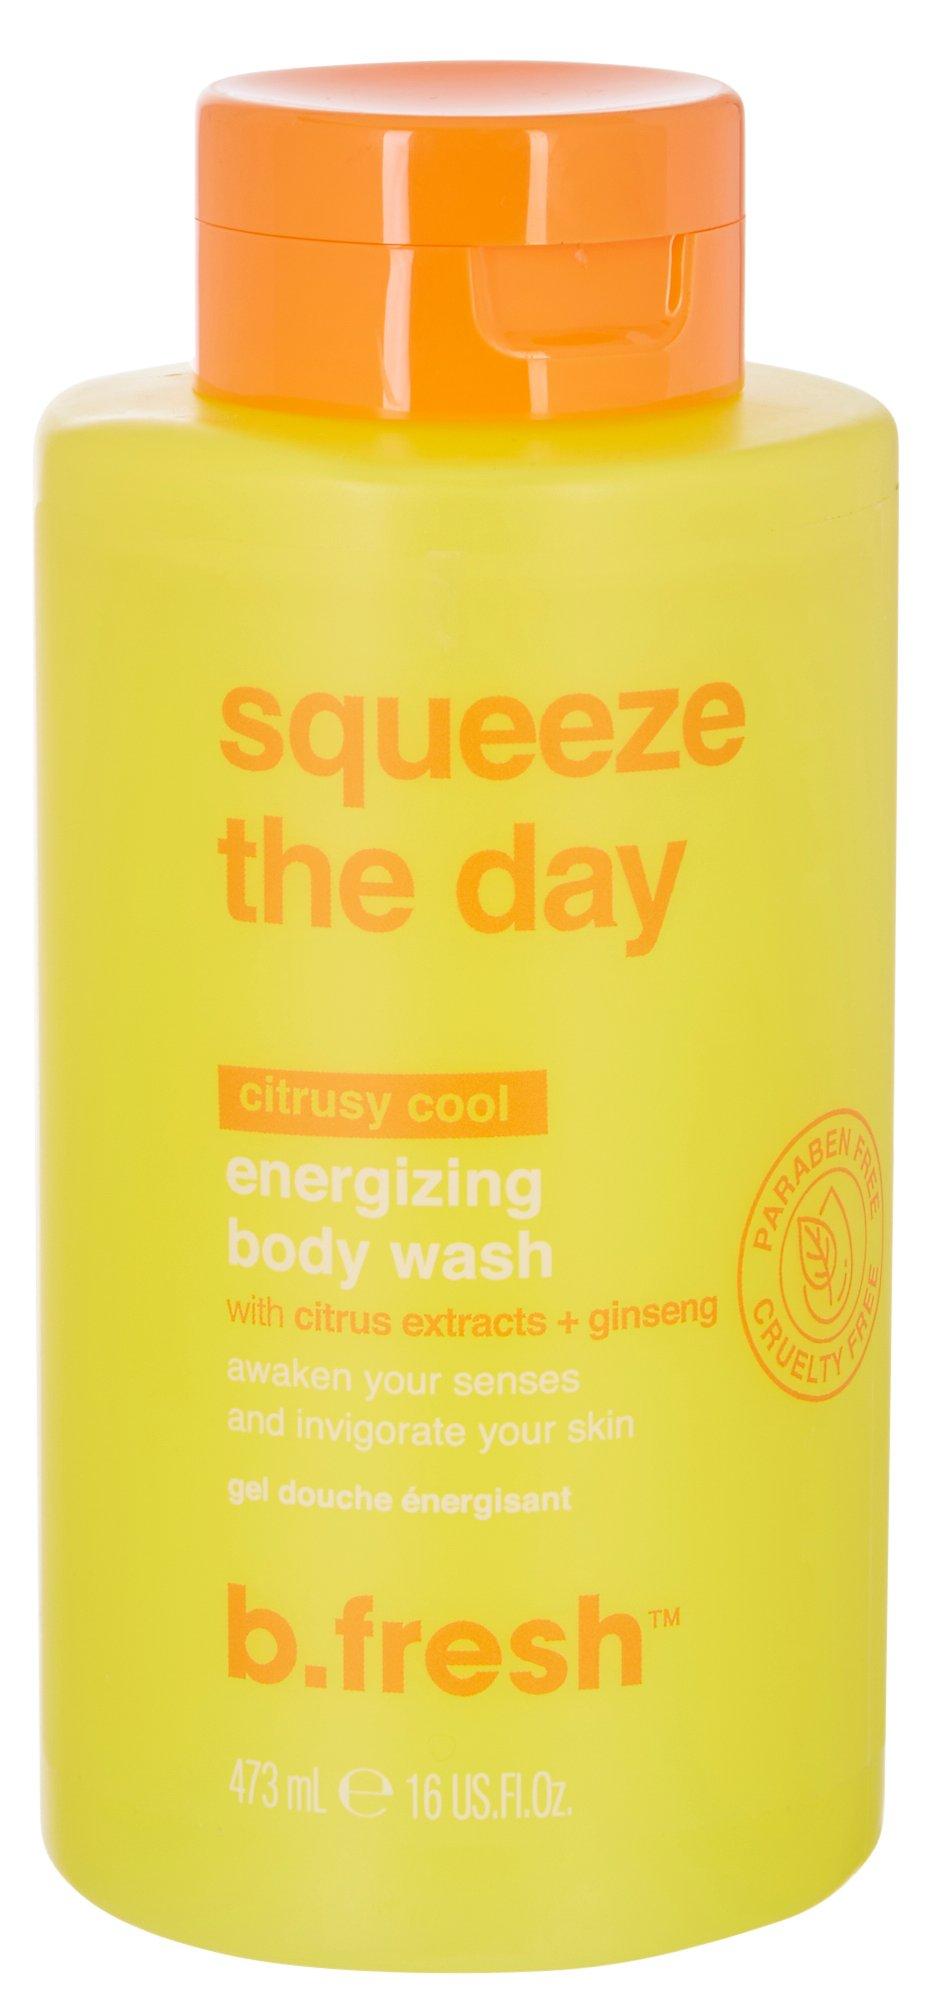 B. Fresh Squeeze The Day Energizing Body Wash